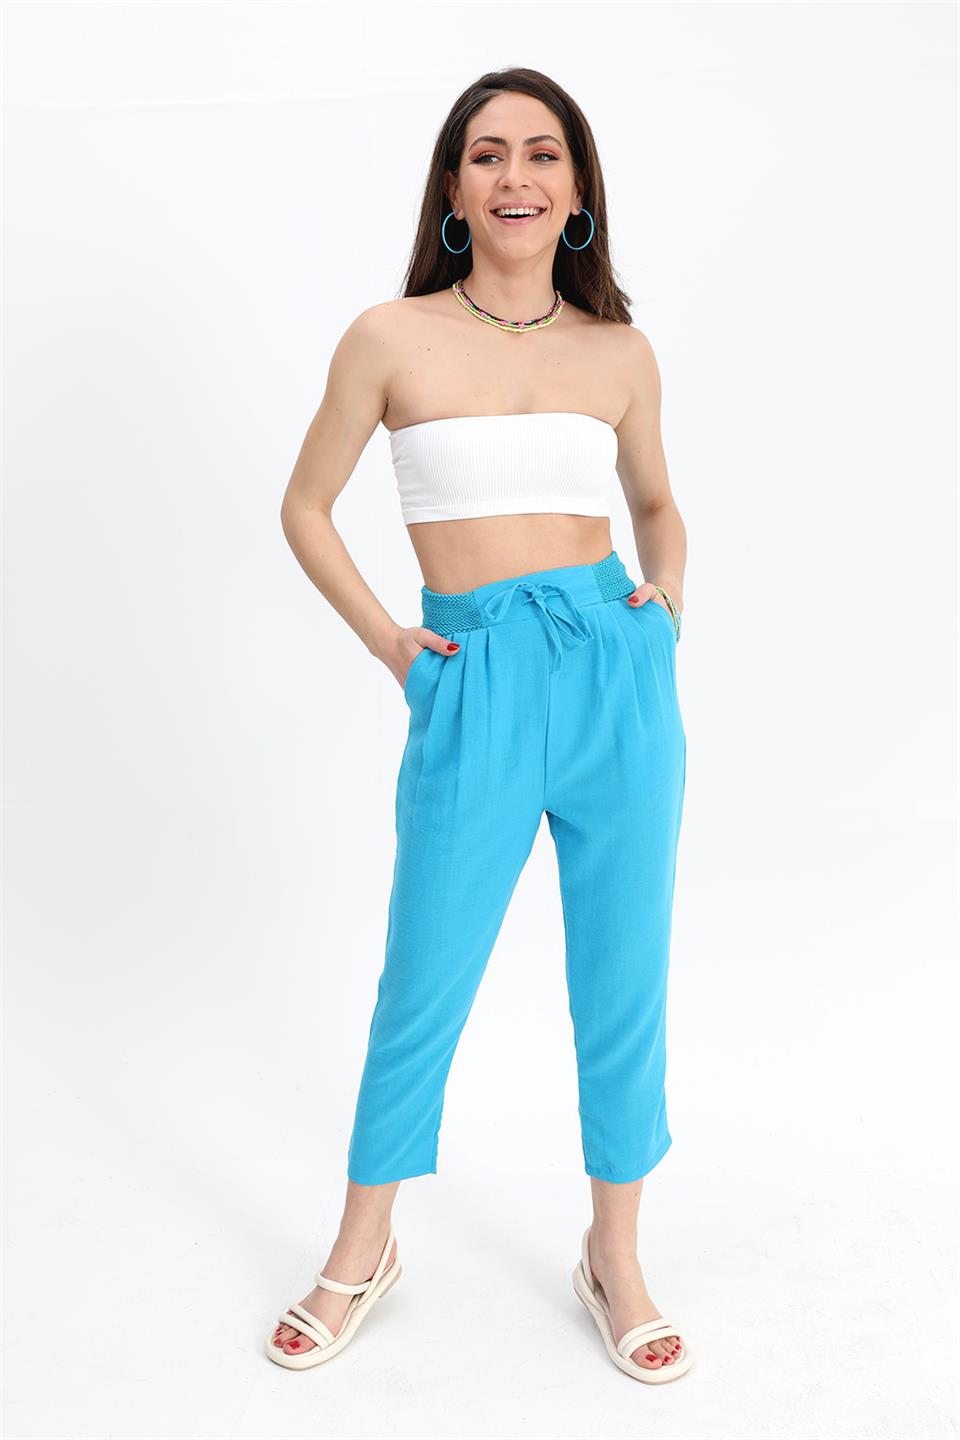 Women's Trousers Waist Elastic Corded Cotton Fabric - Blue - STREETMODE ™